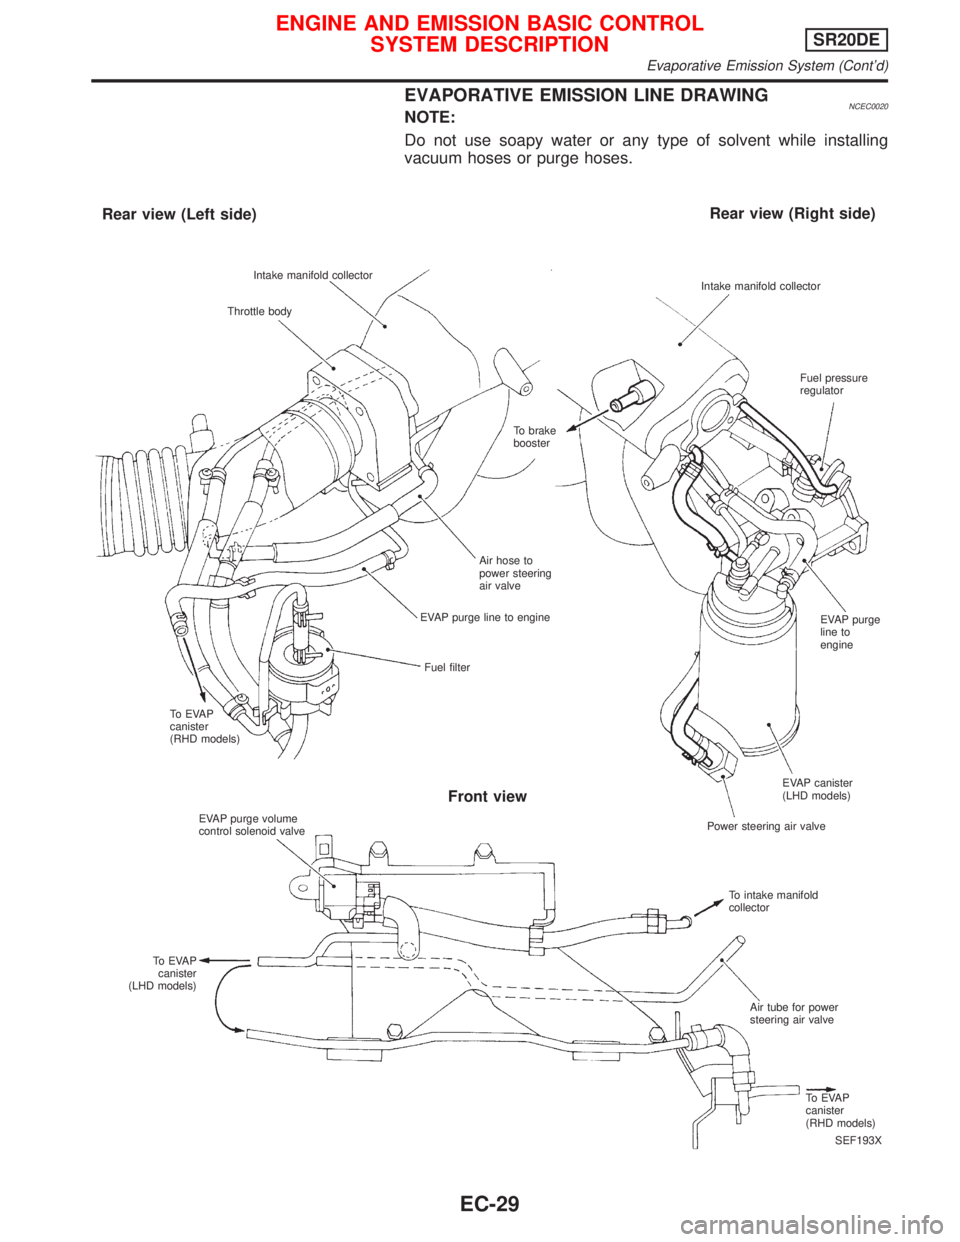 NISSAN PRIMERA 1999  Electronic Repair Manual EVAPORATIVE EMISSION LINE DRAWINGNCEC0020NOTE:
Do not use soapy water or any type of solvent while installing
vacuum hoses or purge hoses.
SEF193X Intake manifold collector
Throttle body
Rear view (Le